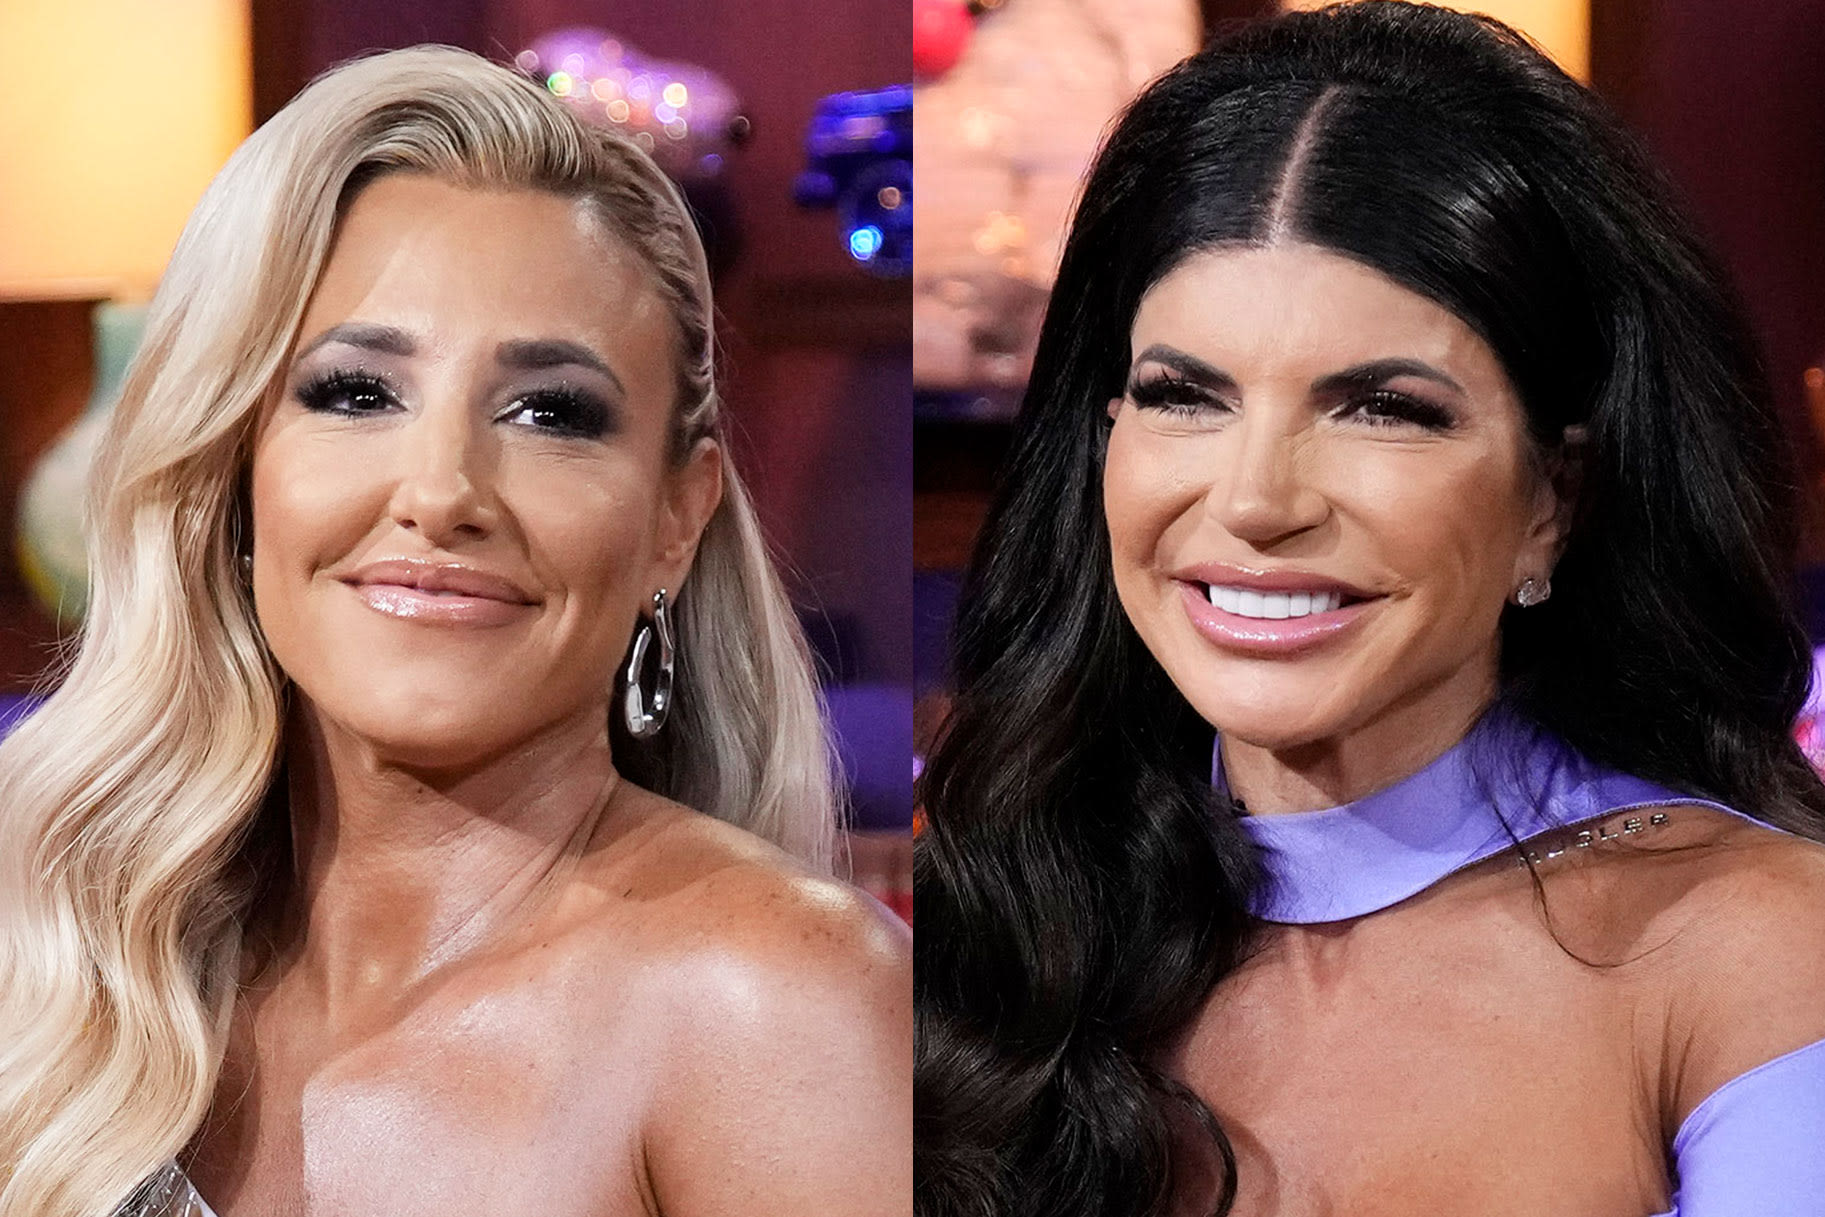 Danielle Cabral Shares Surprising News About Her Friendship with Teresa Giudice | Bravo TV Official Site